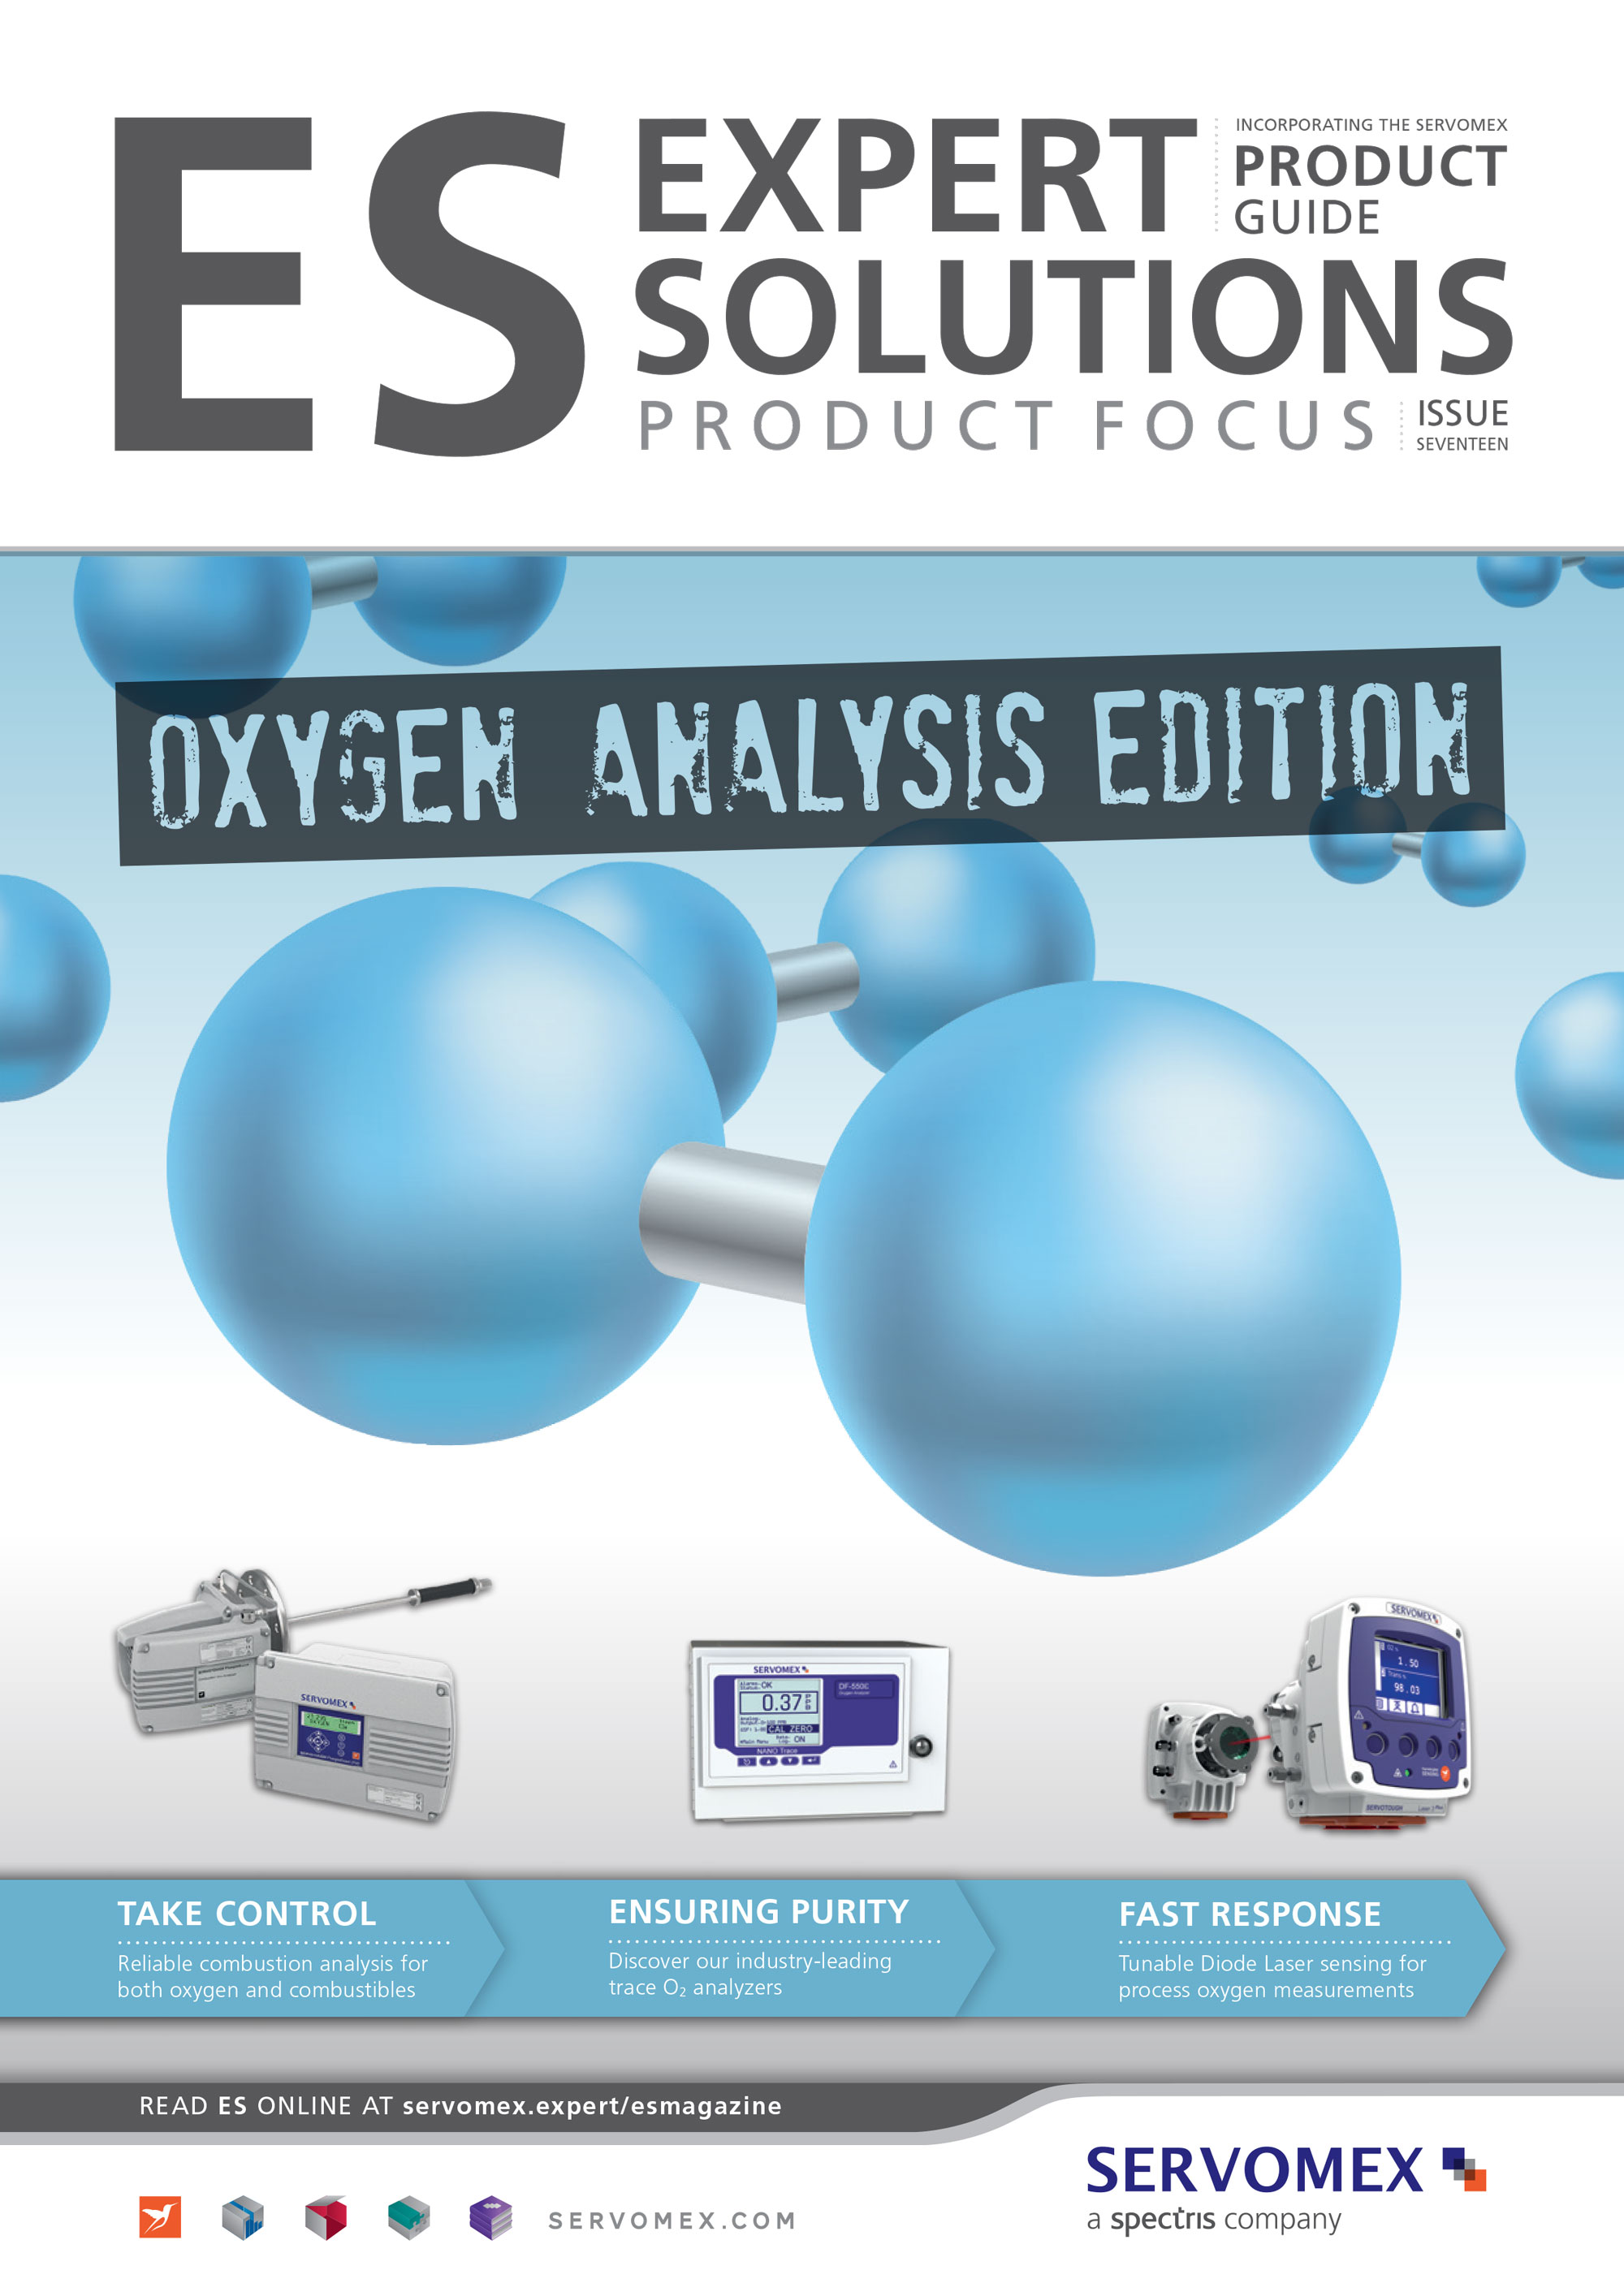 Focusing on Oxygen Analysis Solutions - The issue will focus on the wide range of oxygen (O2) analysis solutions offered by SERVOMEX